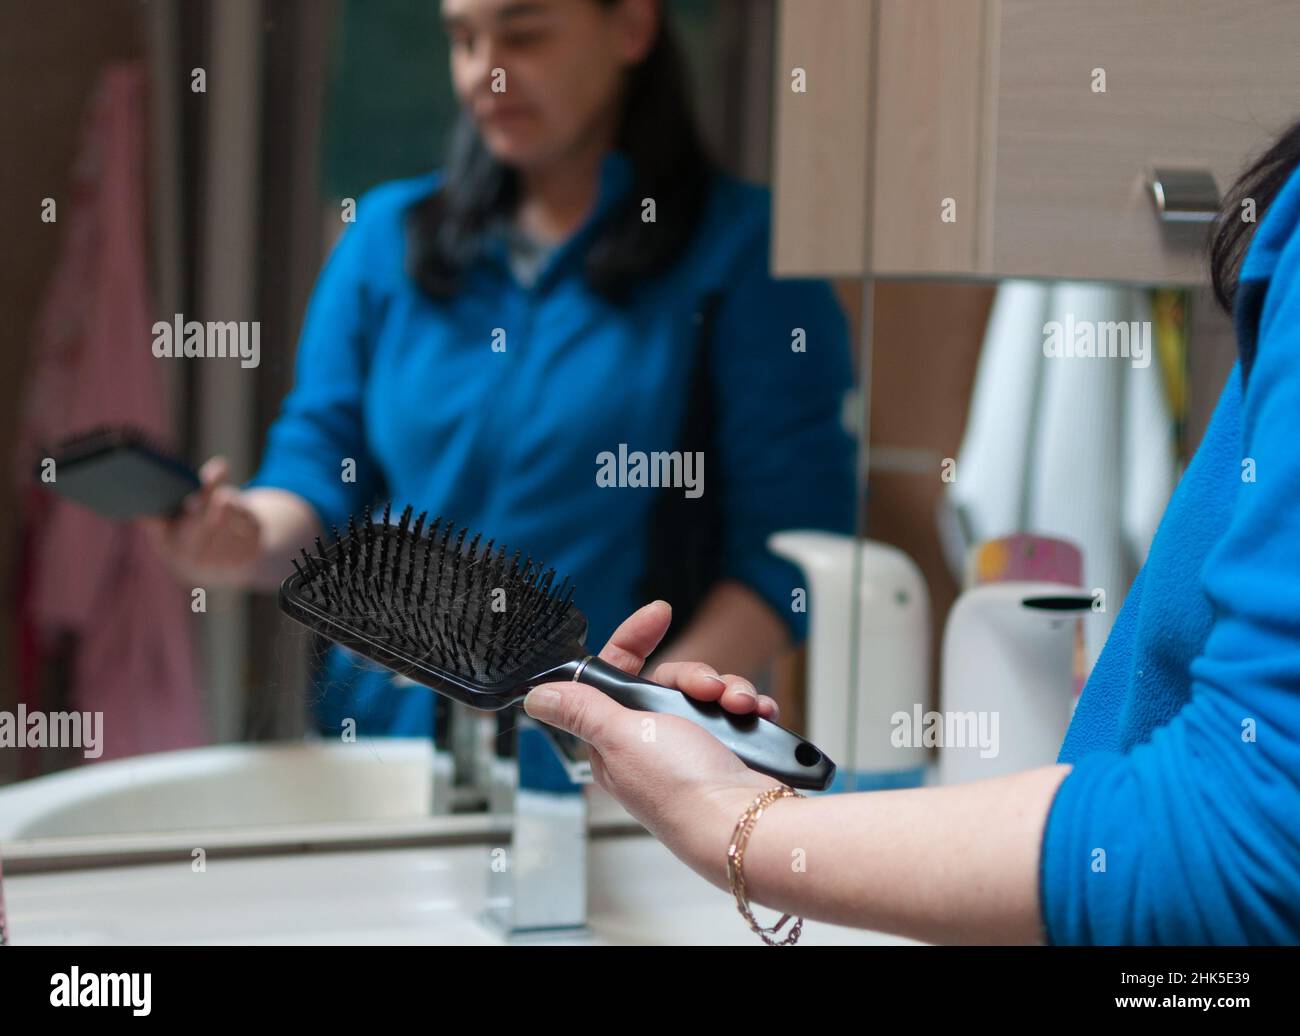 woman looks at hair brush with lost hair on it. hairbrush in foreground, woman blurred in background Stock Photo